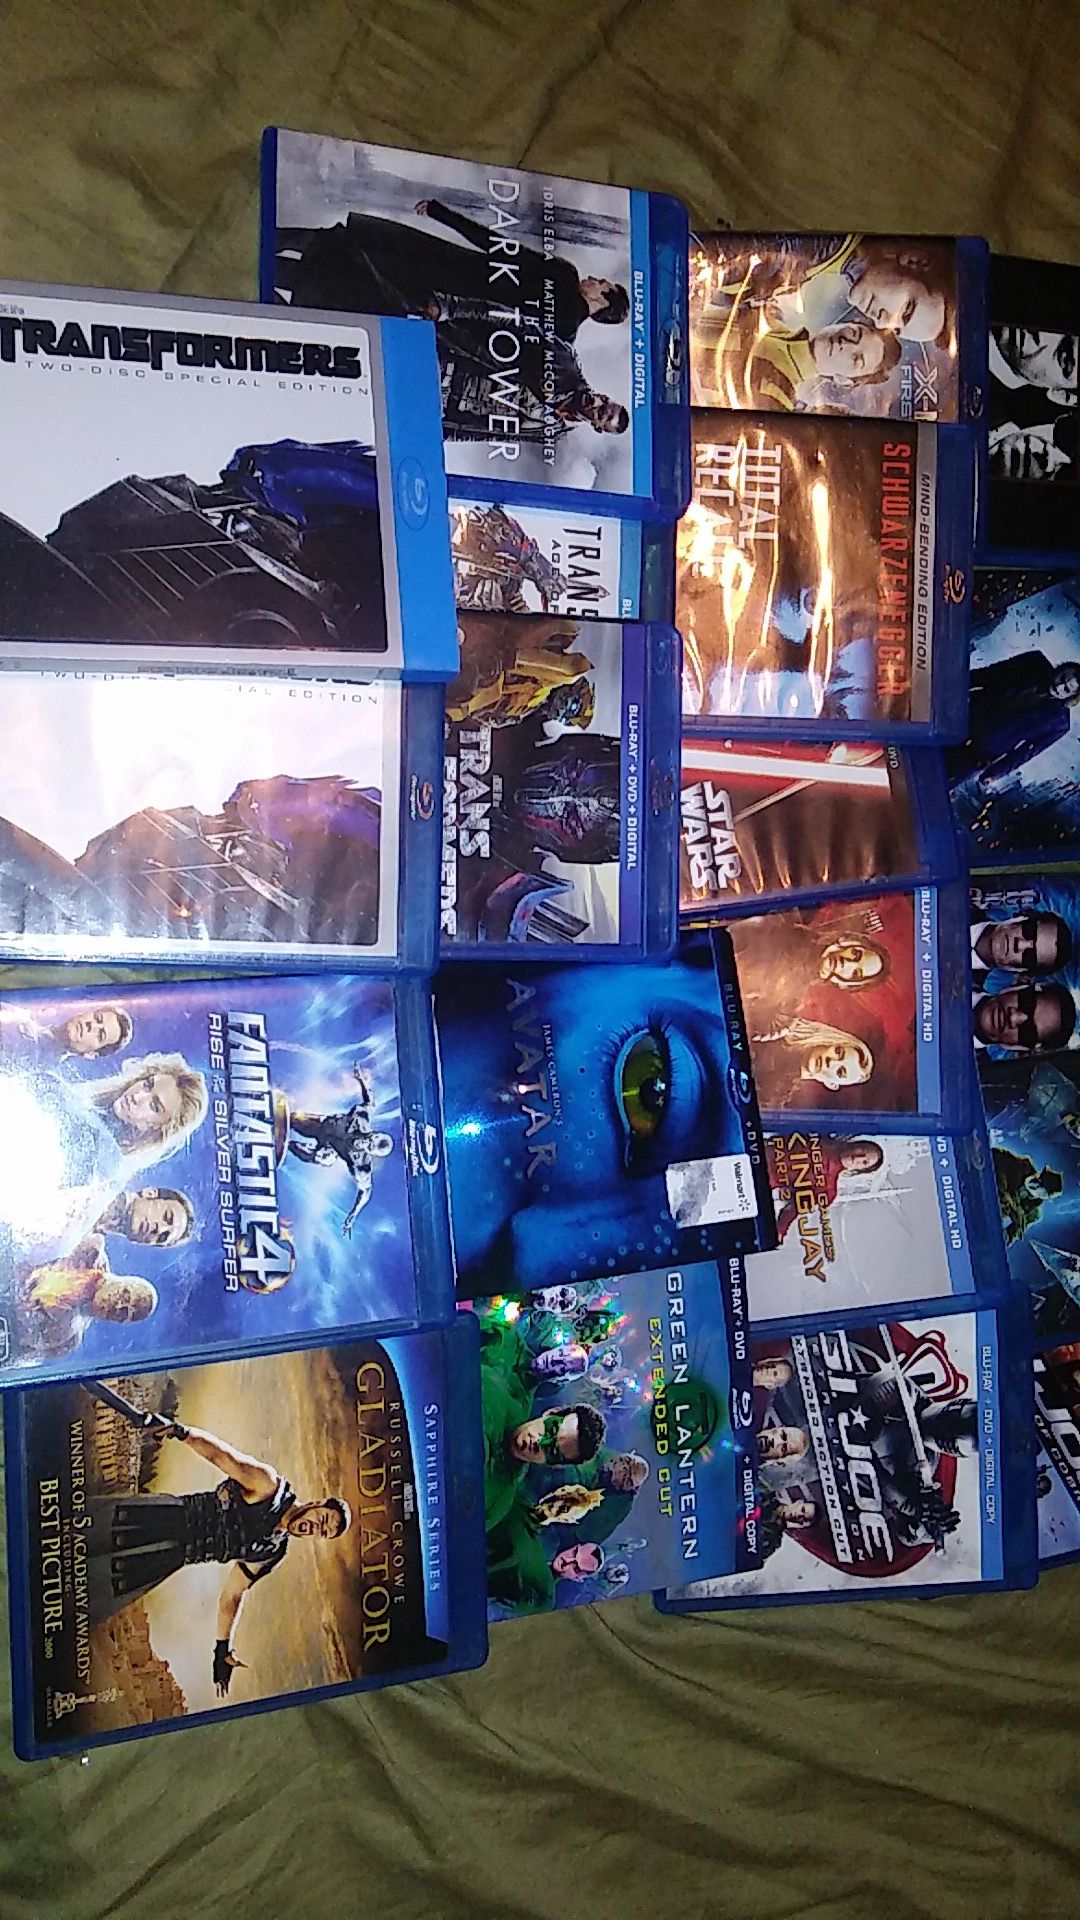 Blu-rays 3 for10$